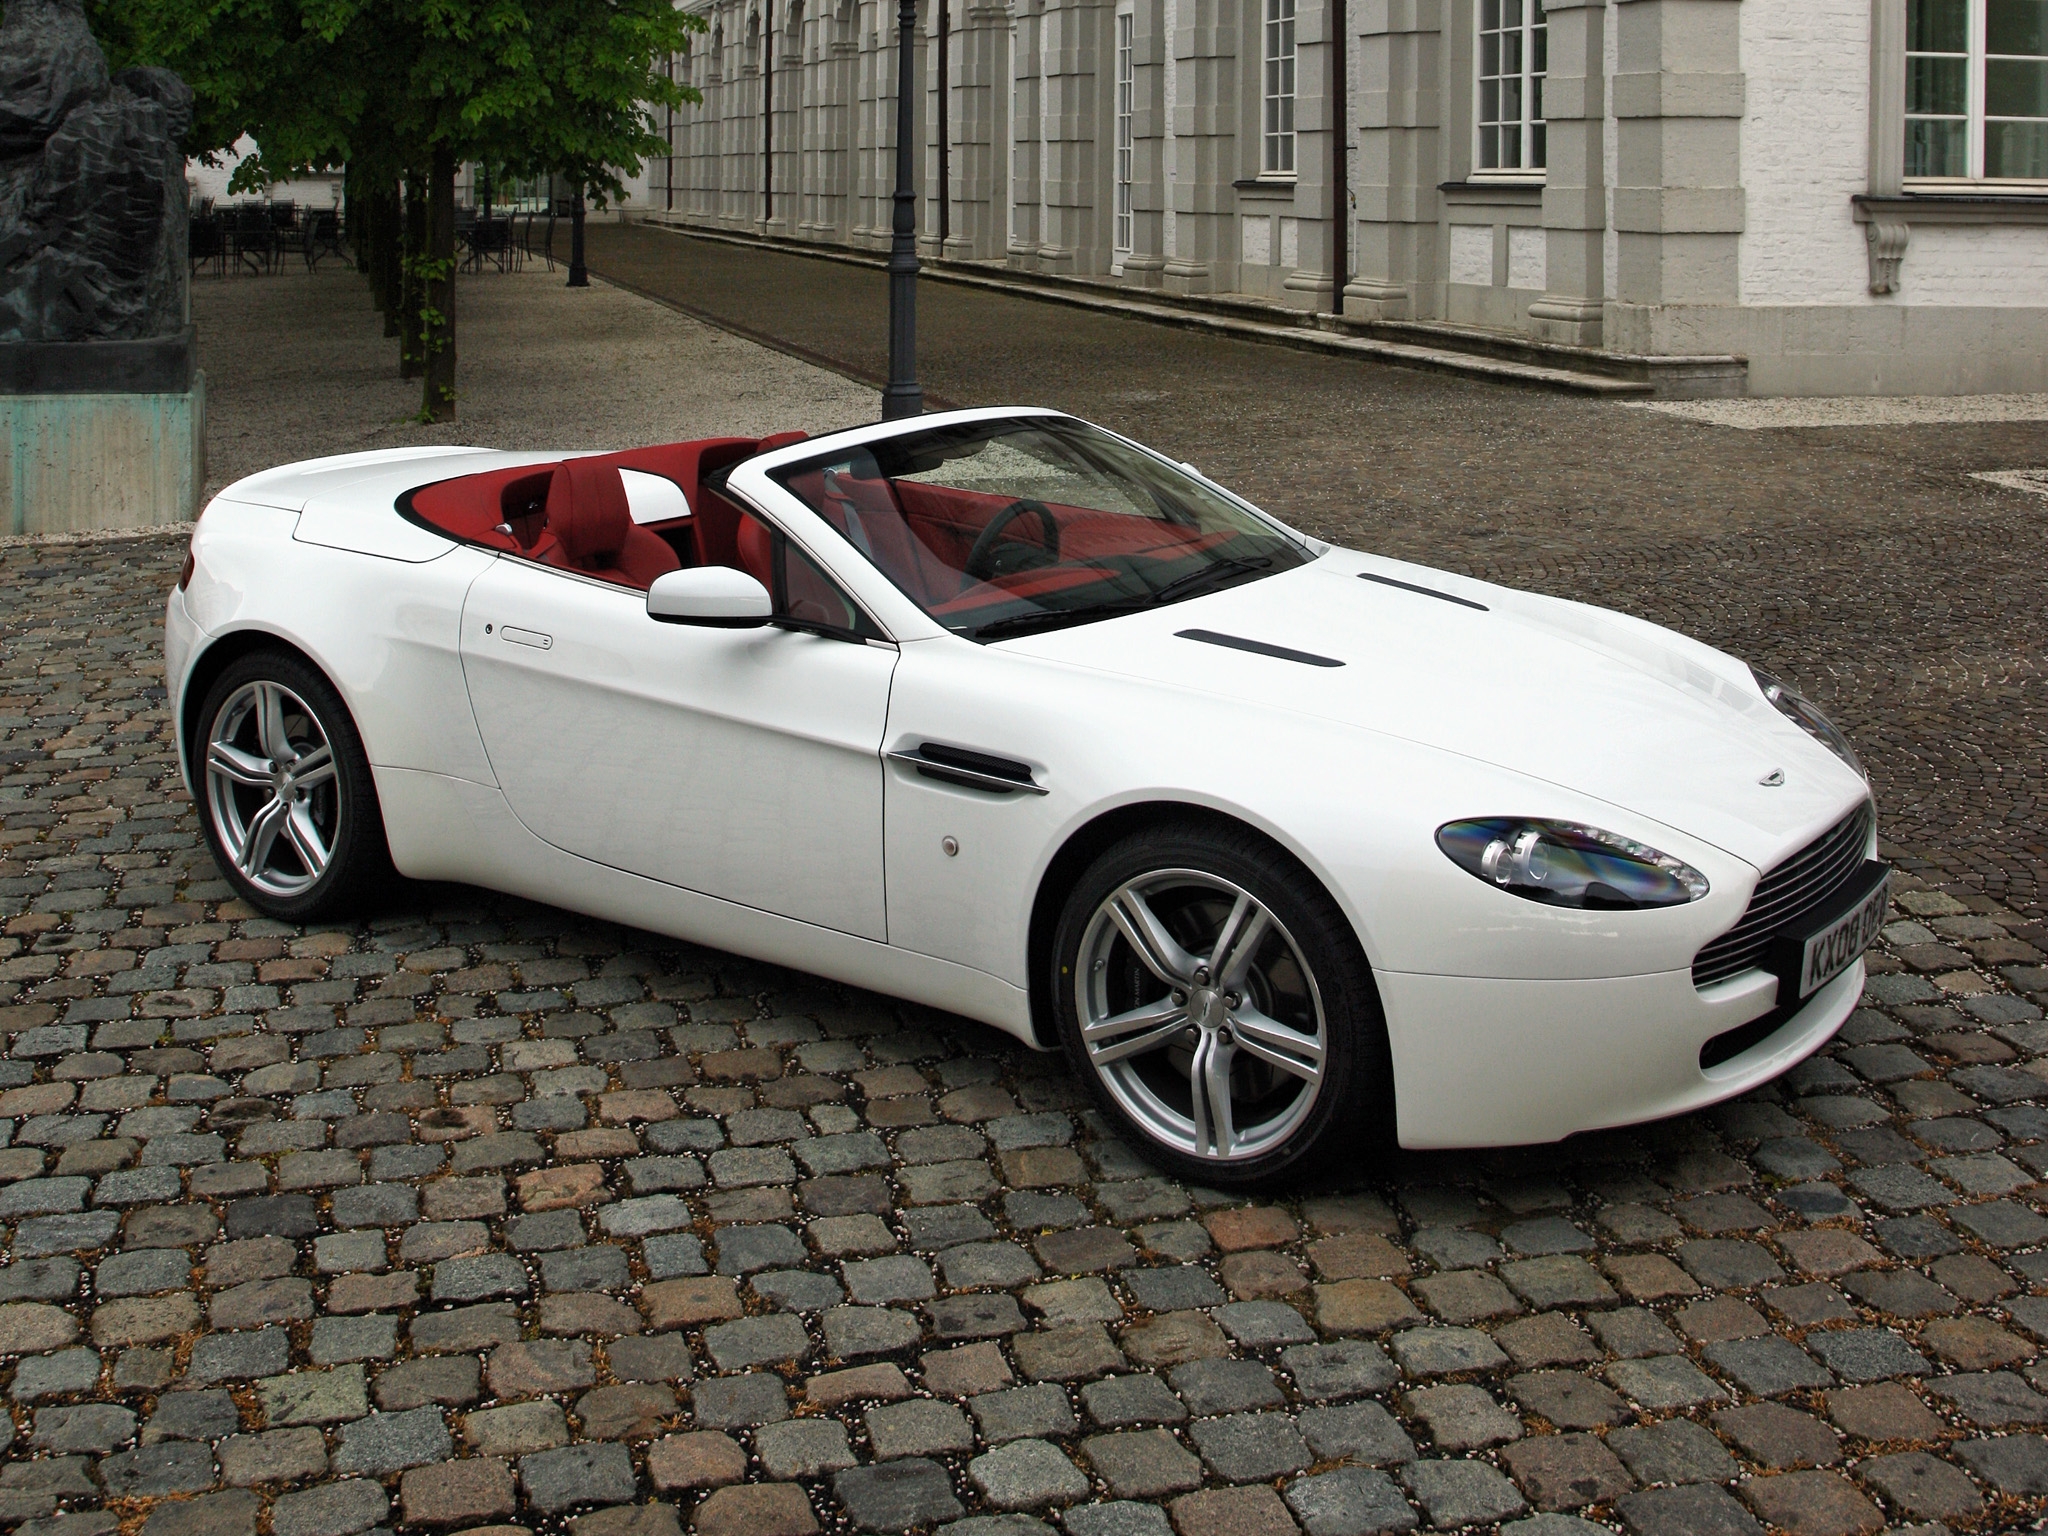 v8, aston martin, cars, white, side view, style, cabriolet, 2008, street, vantage images